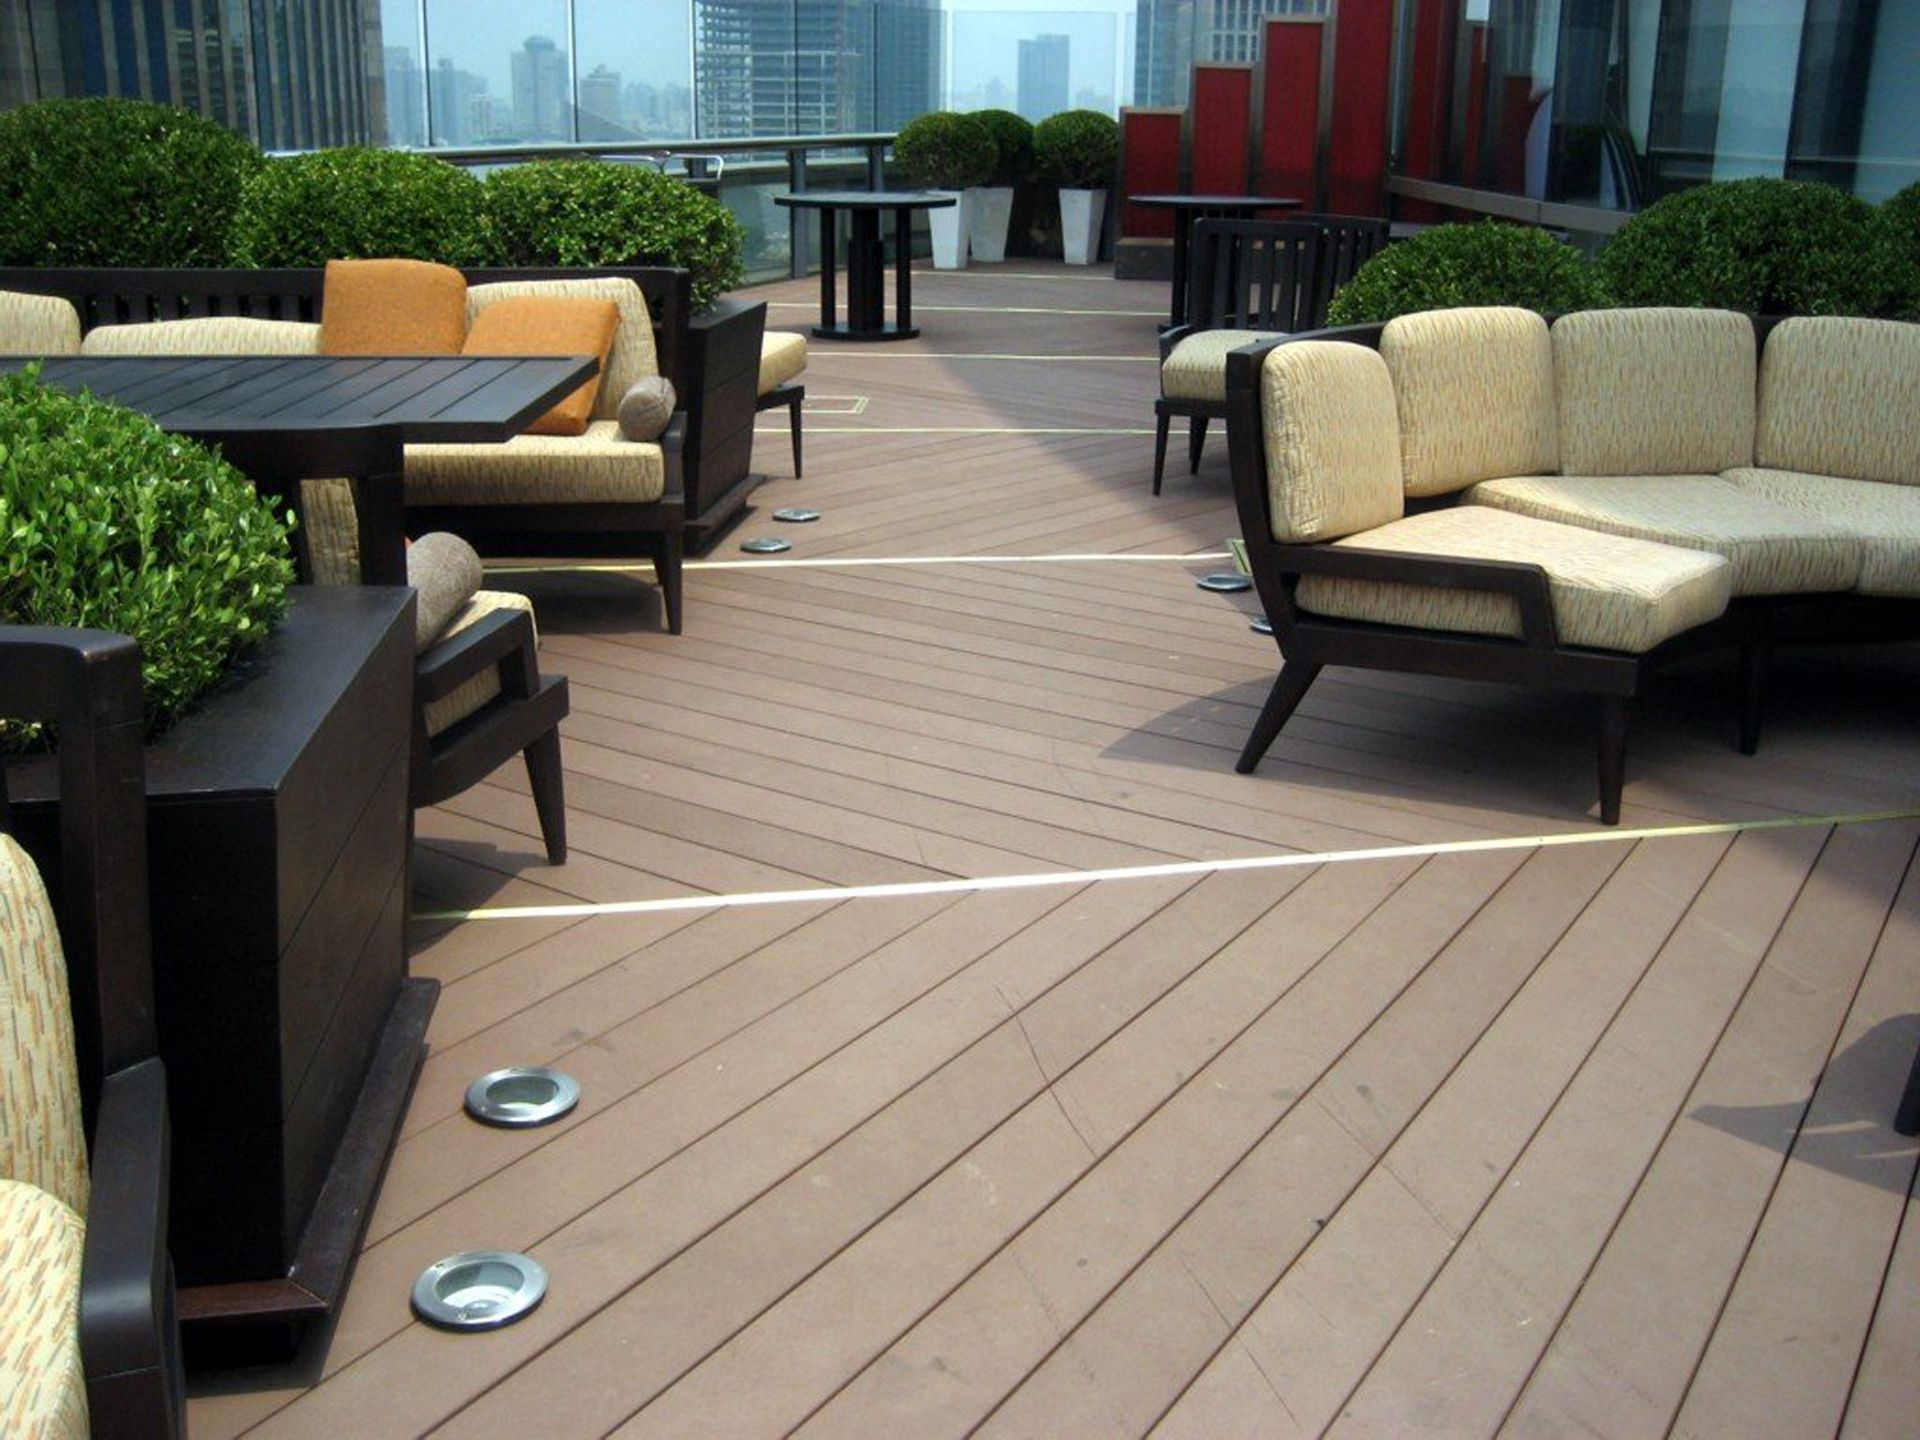 12 2x6 Composite Decking Prices Wpc Decking Composite Deck intended for dimensions 1920 X 1440